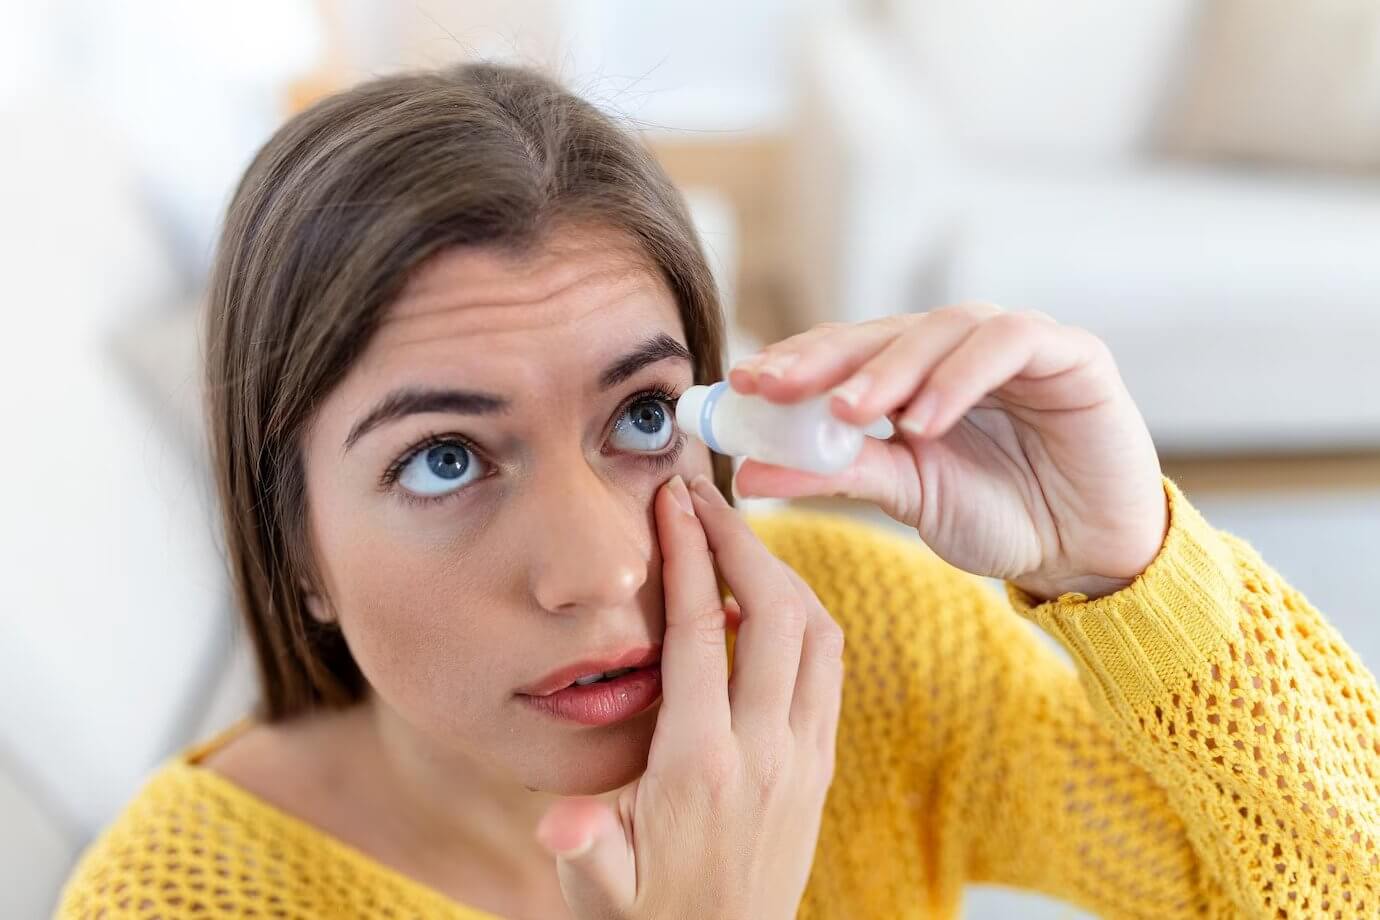 Common causes of eye infections